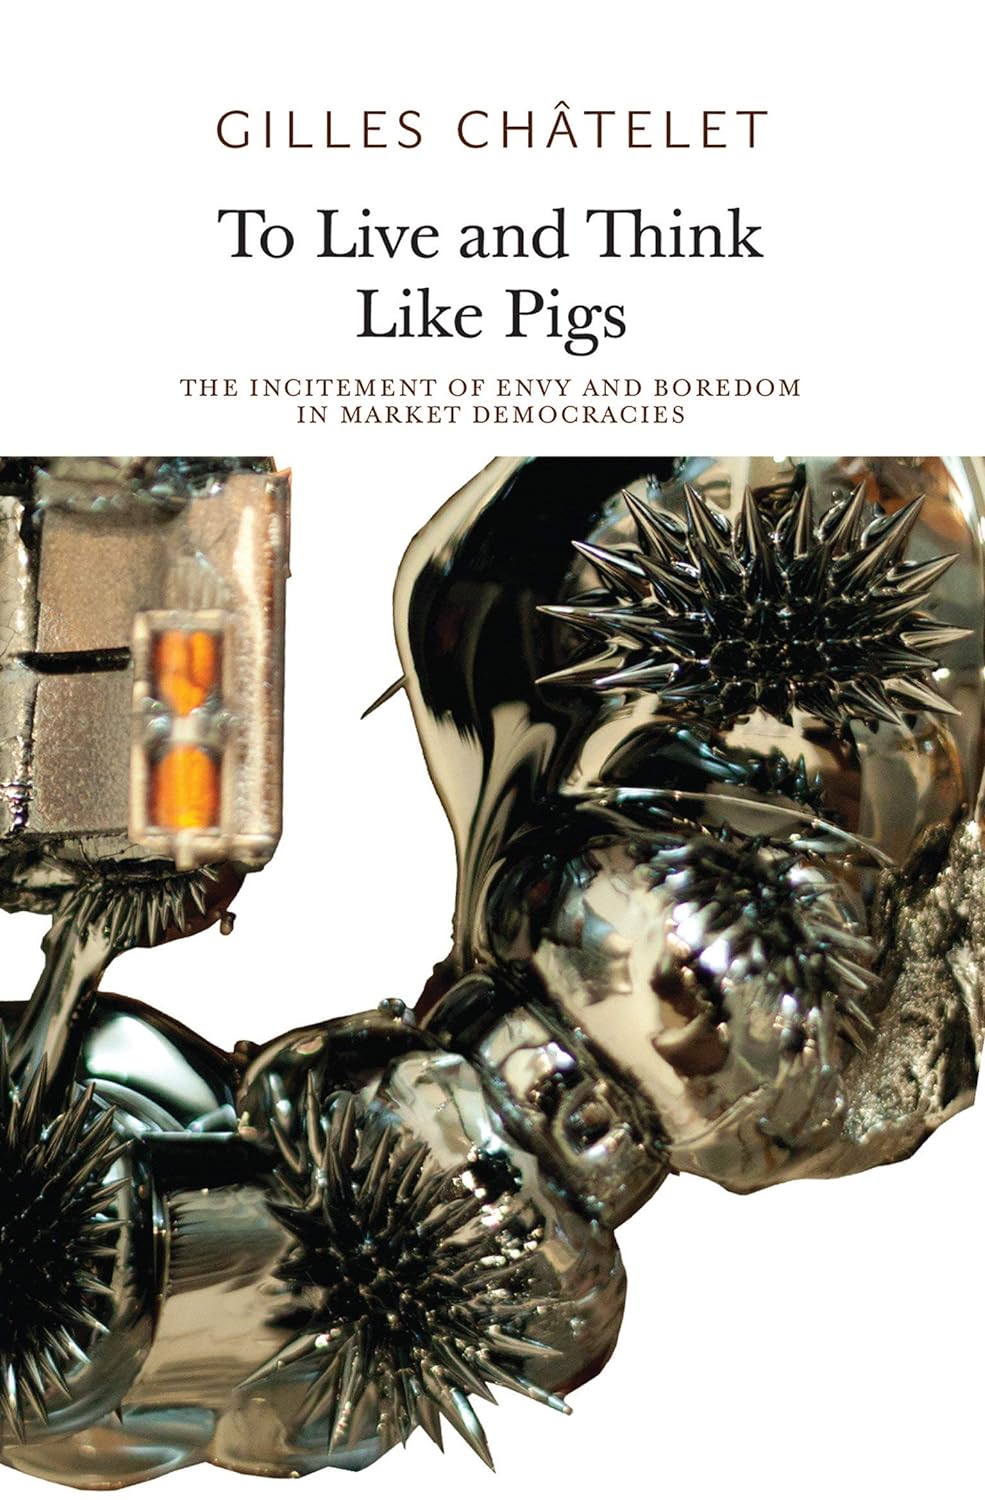 Alain Badiou, Gilles Chatelet: To Live and Think like Pigs (Paperback, english language, 2014, Sequence Press)